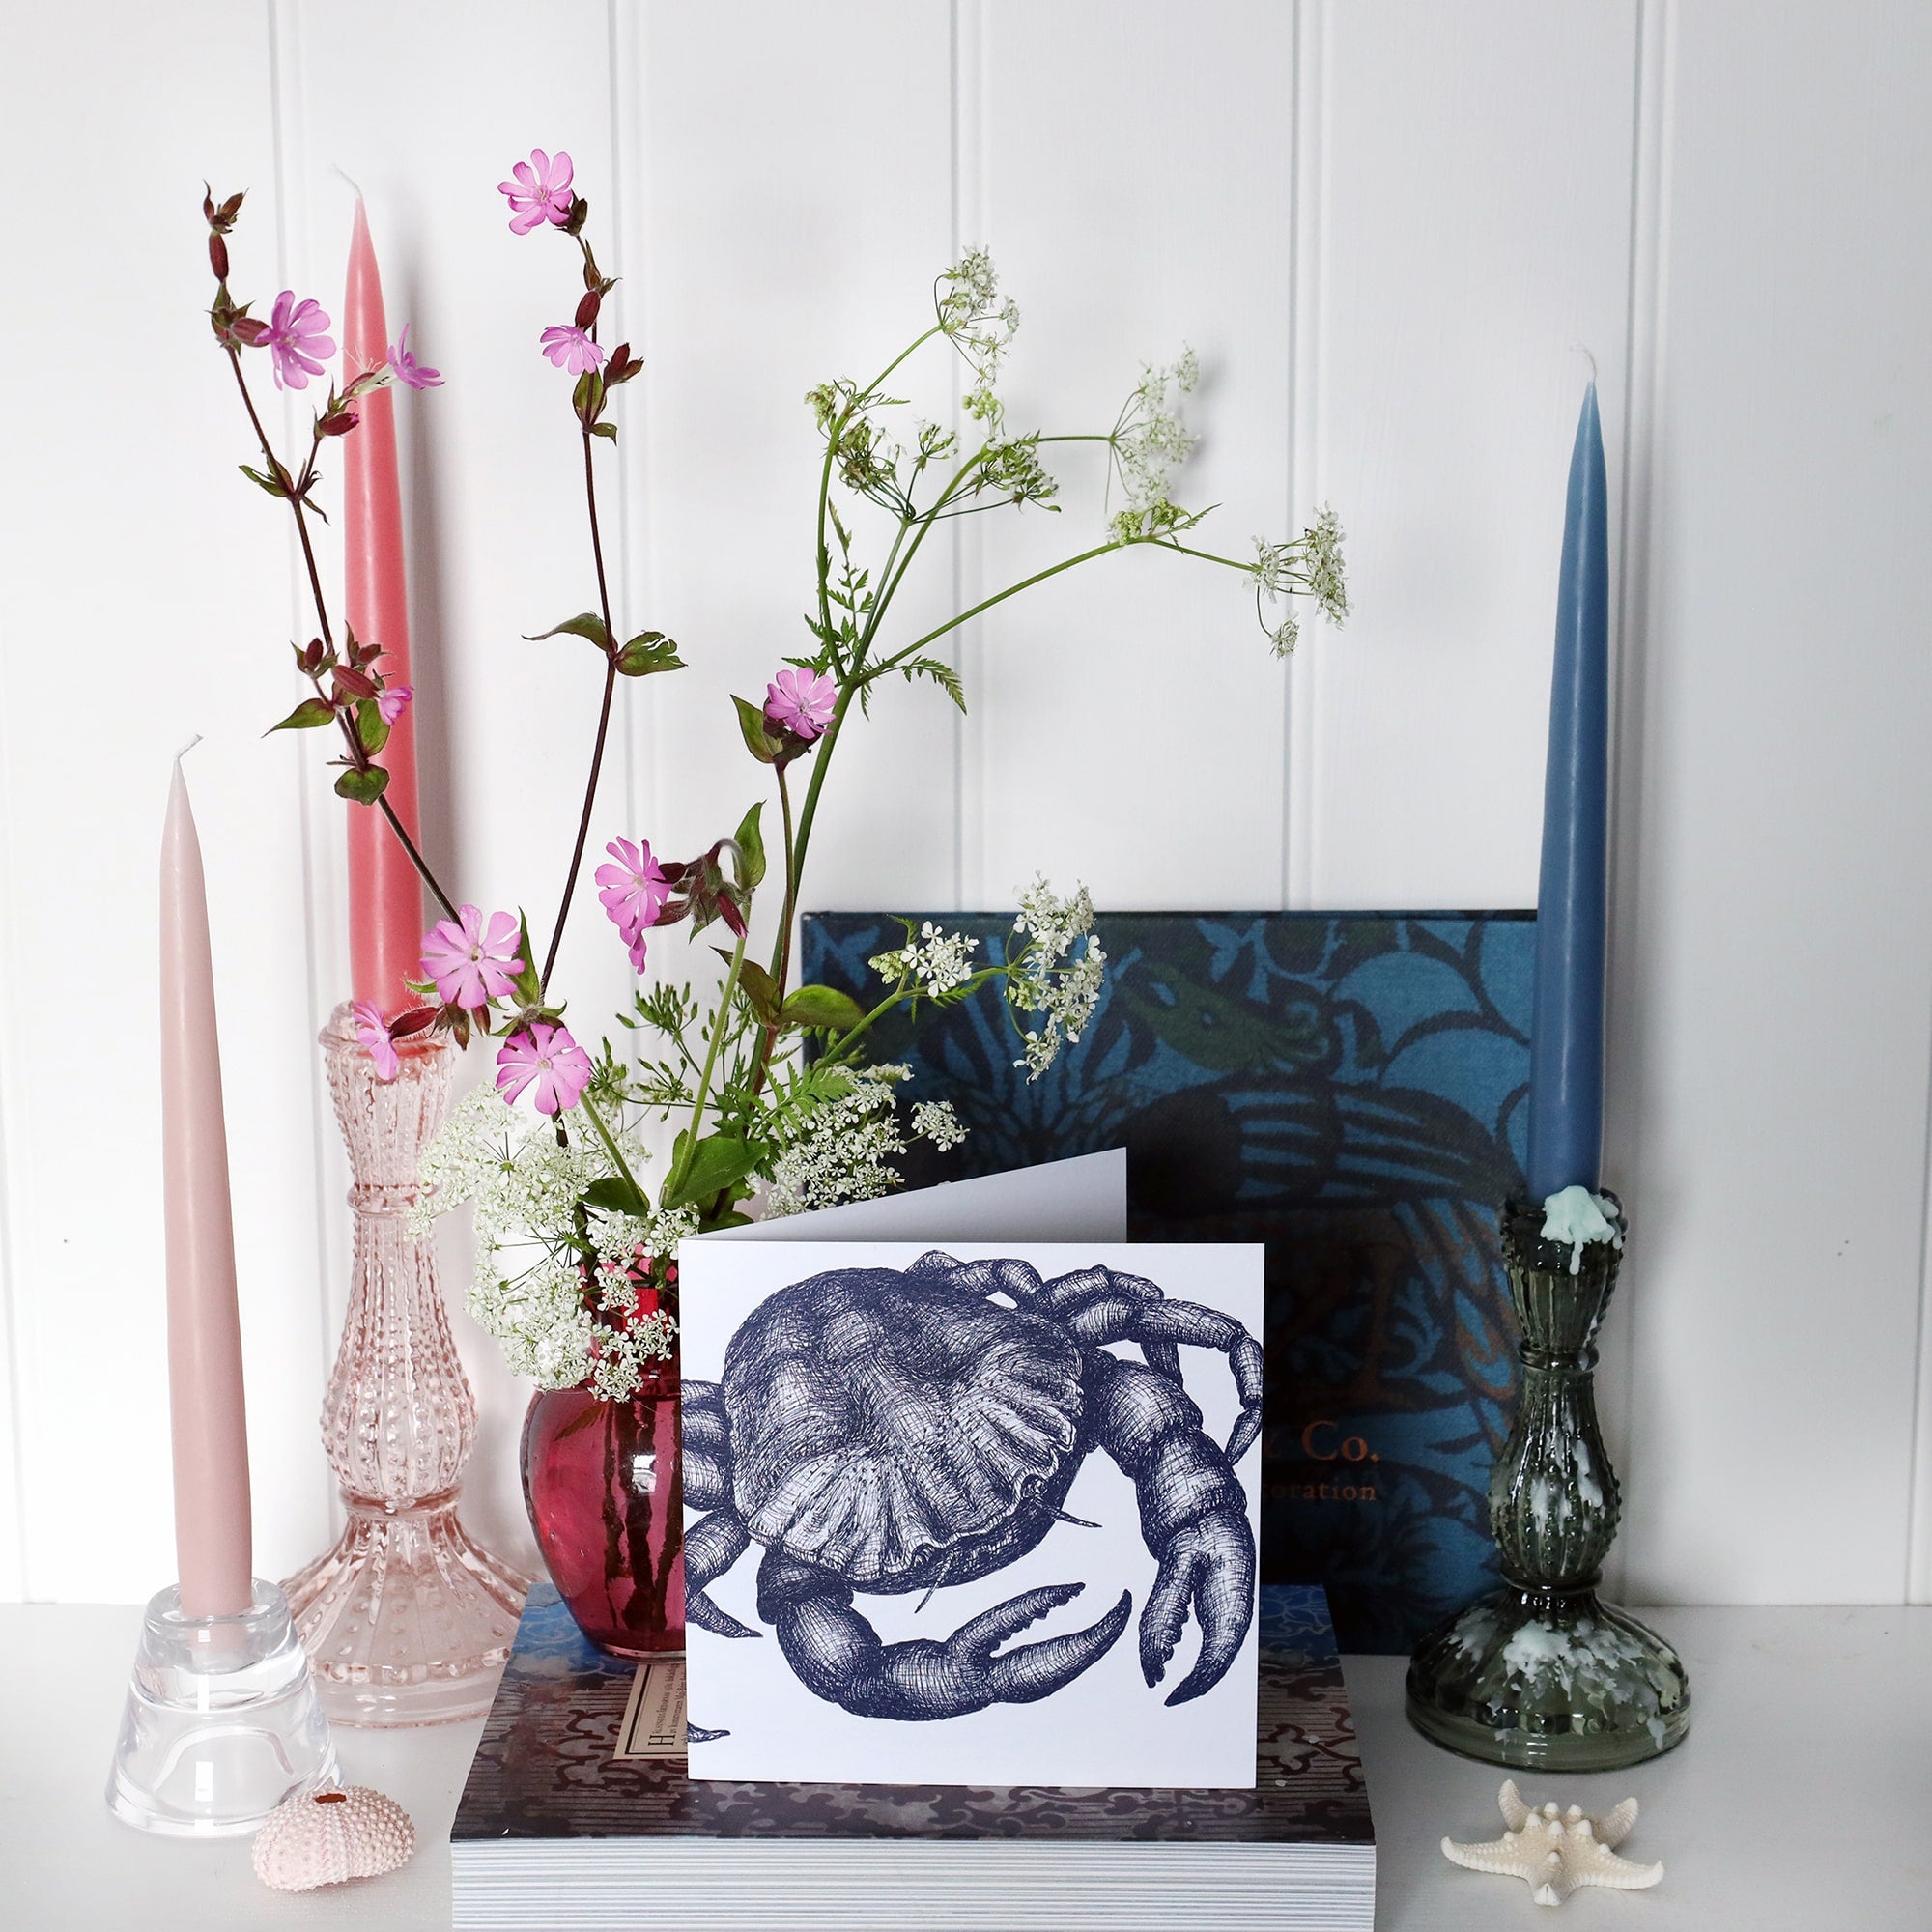 greeting card with navy illustrated crab on a white background on shelf with pink and blue candles in candlesticks and a small cranberry glass jug with wild flowers in